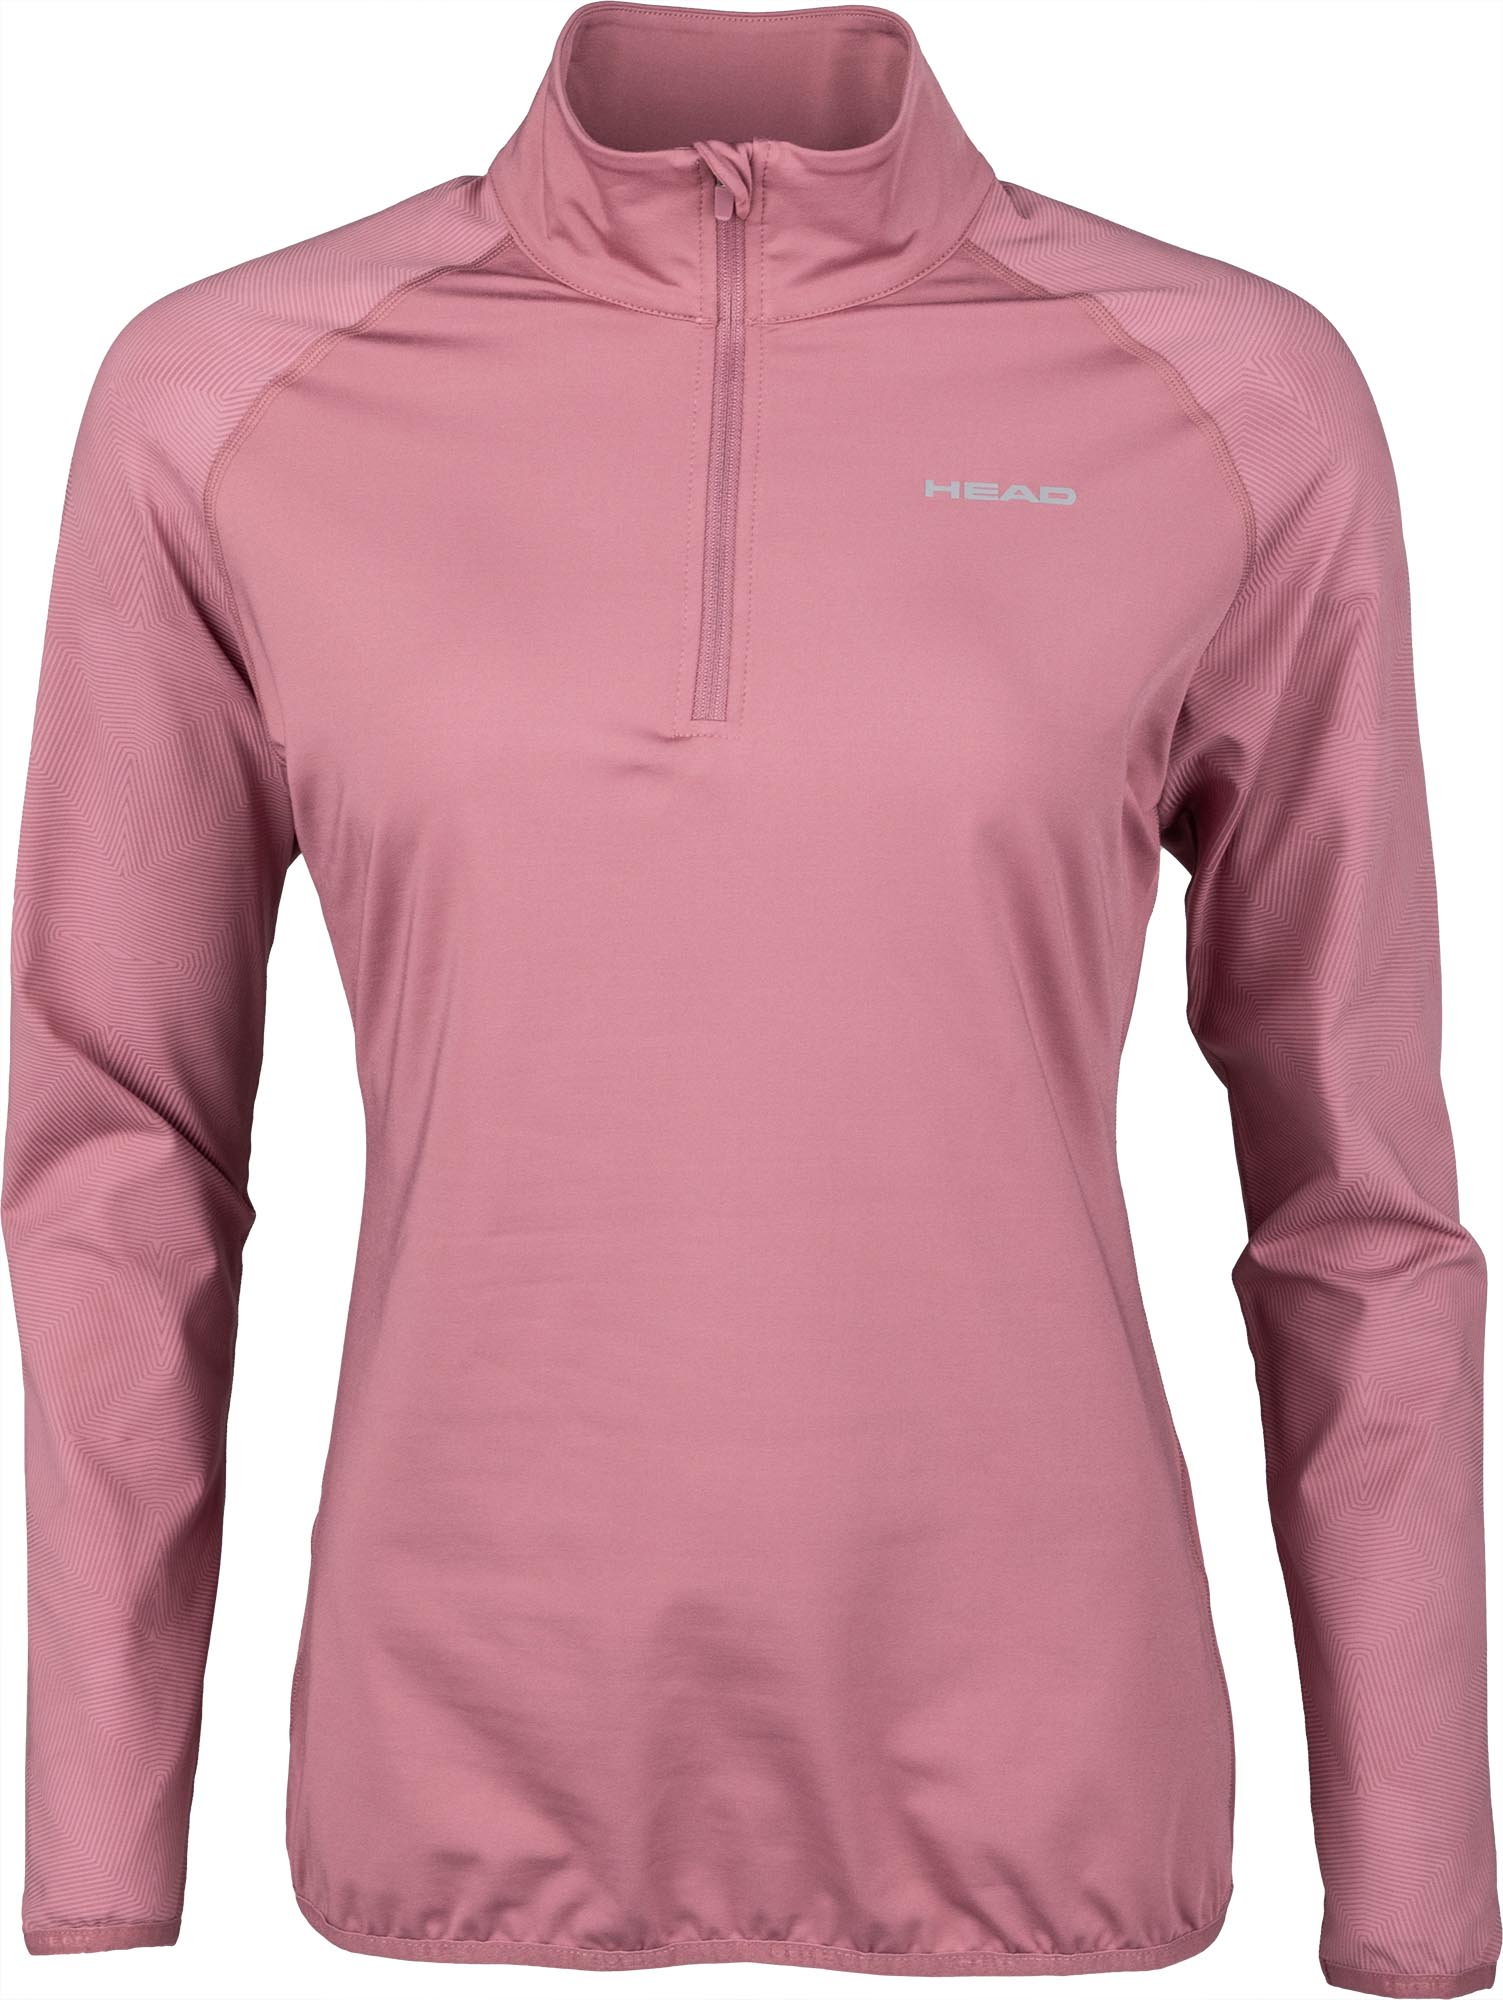 Women’s top with long sleeves